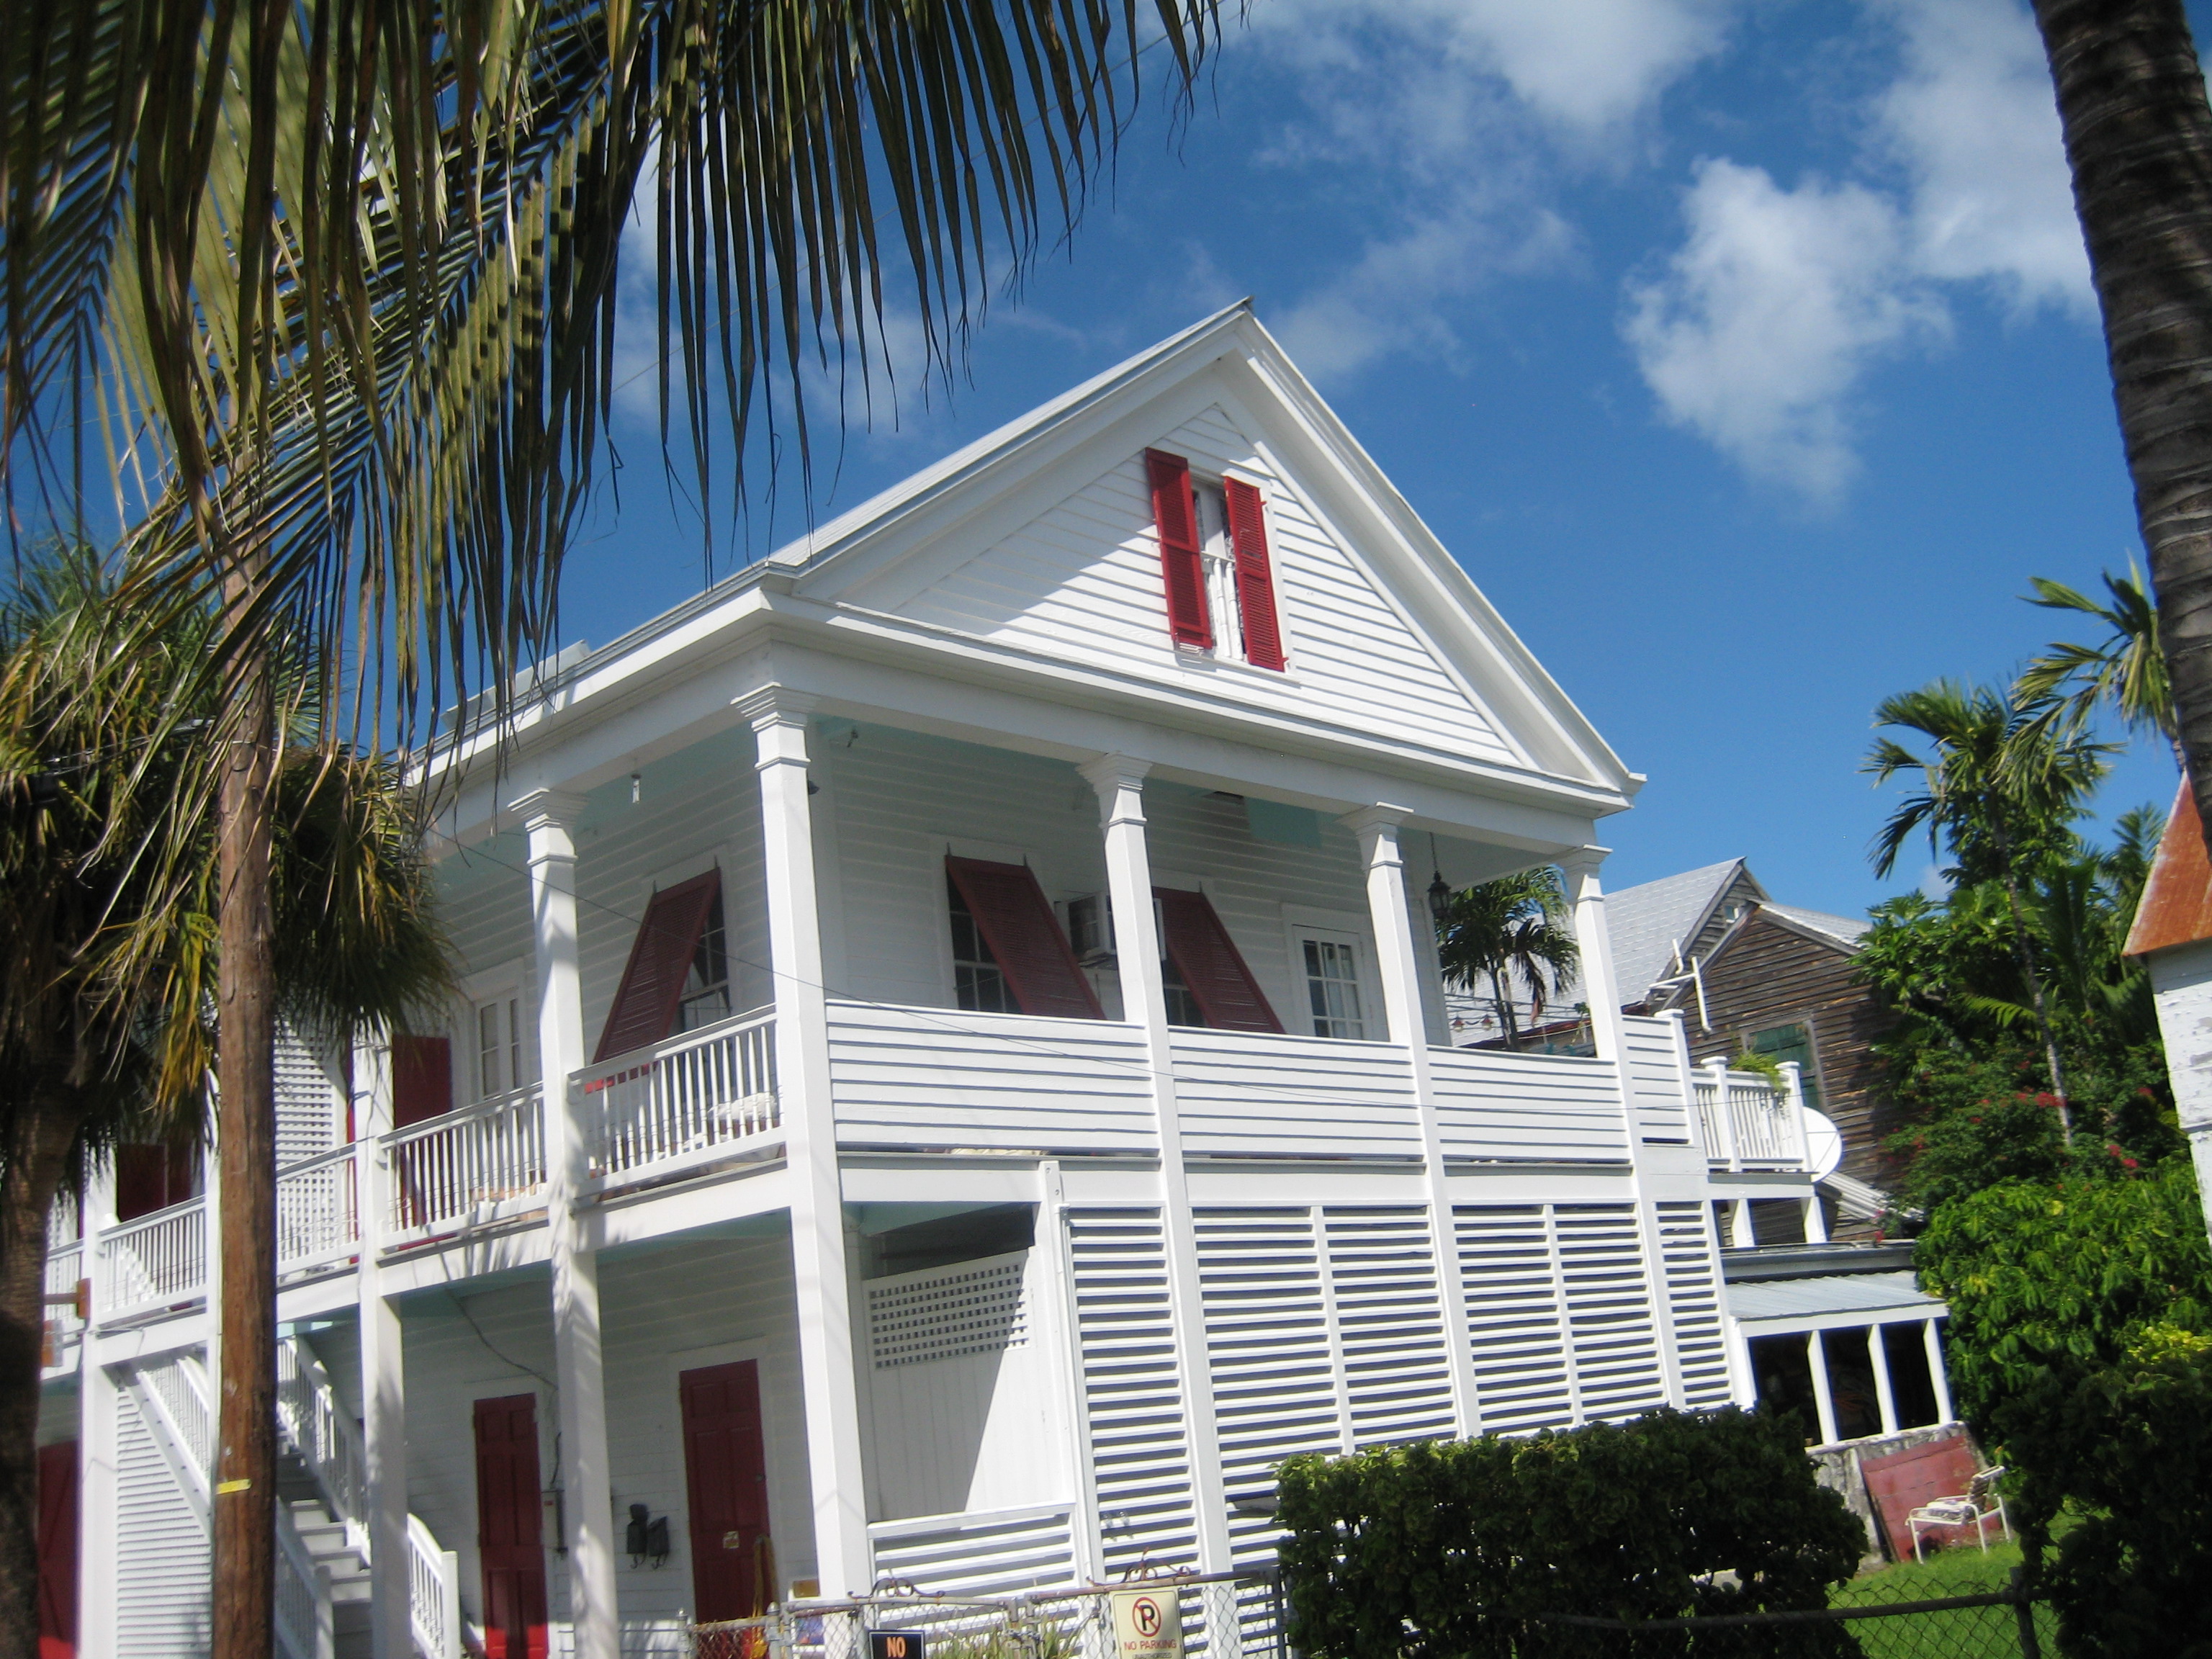 Key West White and Red house